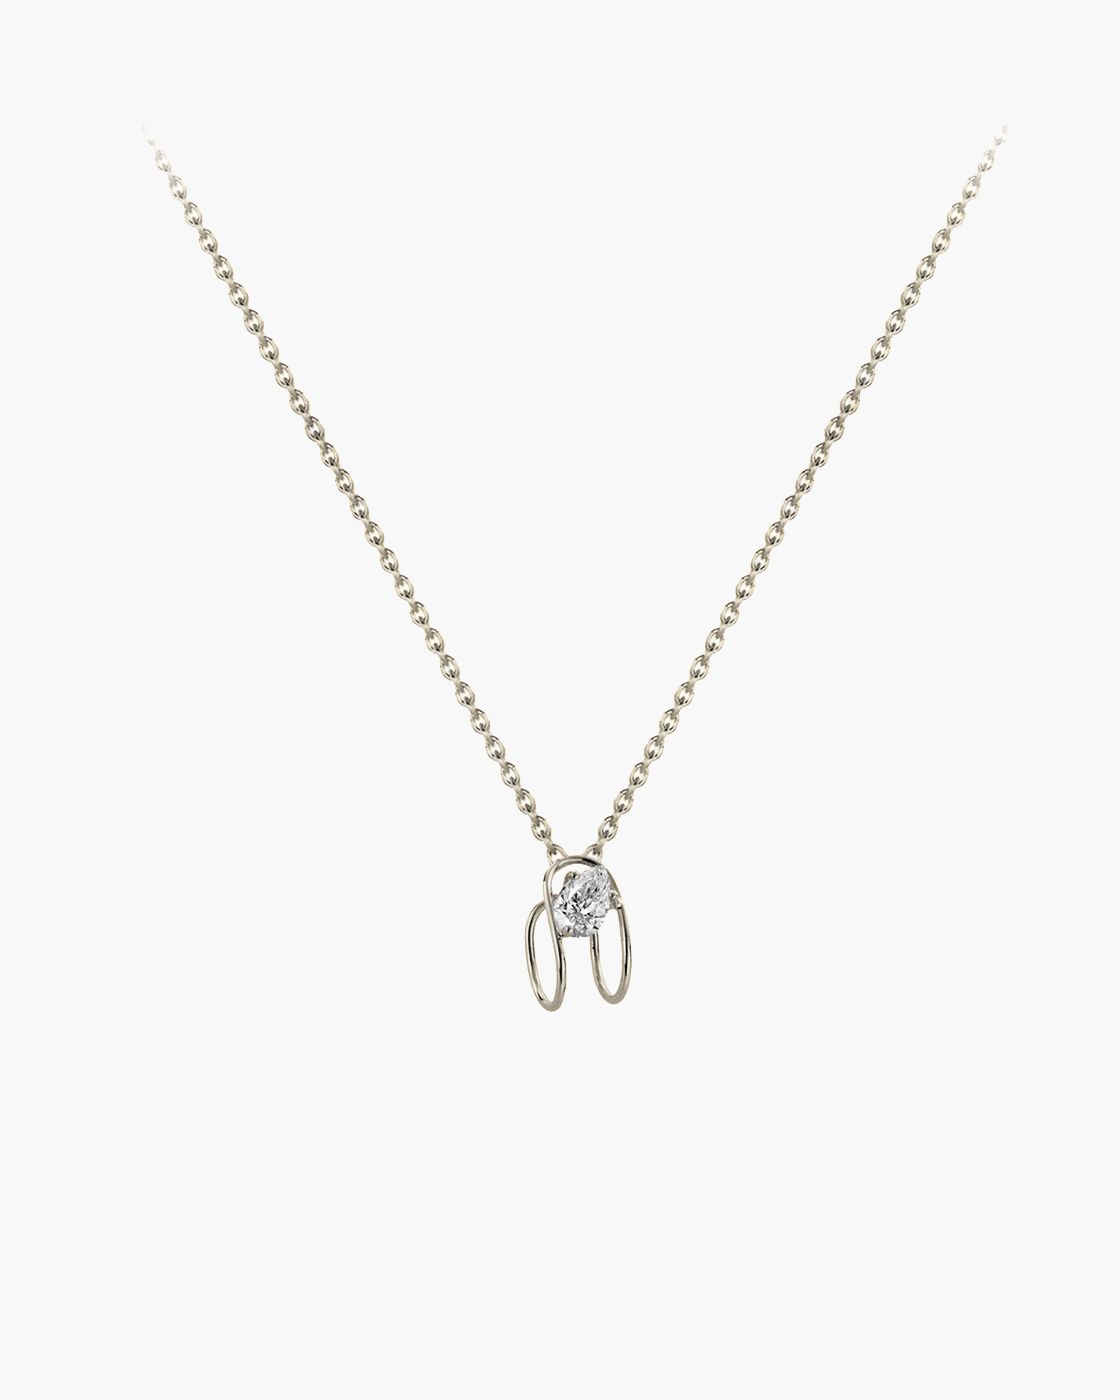 White Gold 18k Double C Necklace with a Lab-Grown Diamond (0.25ct)